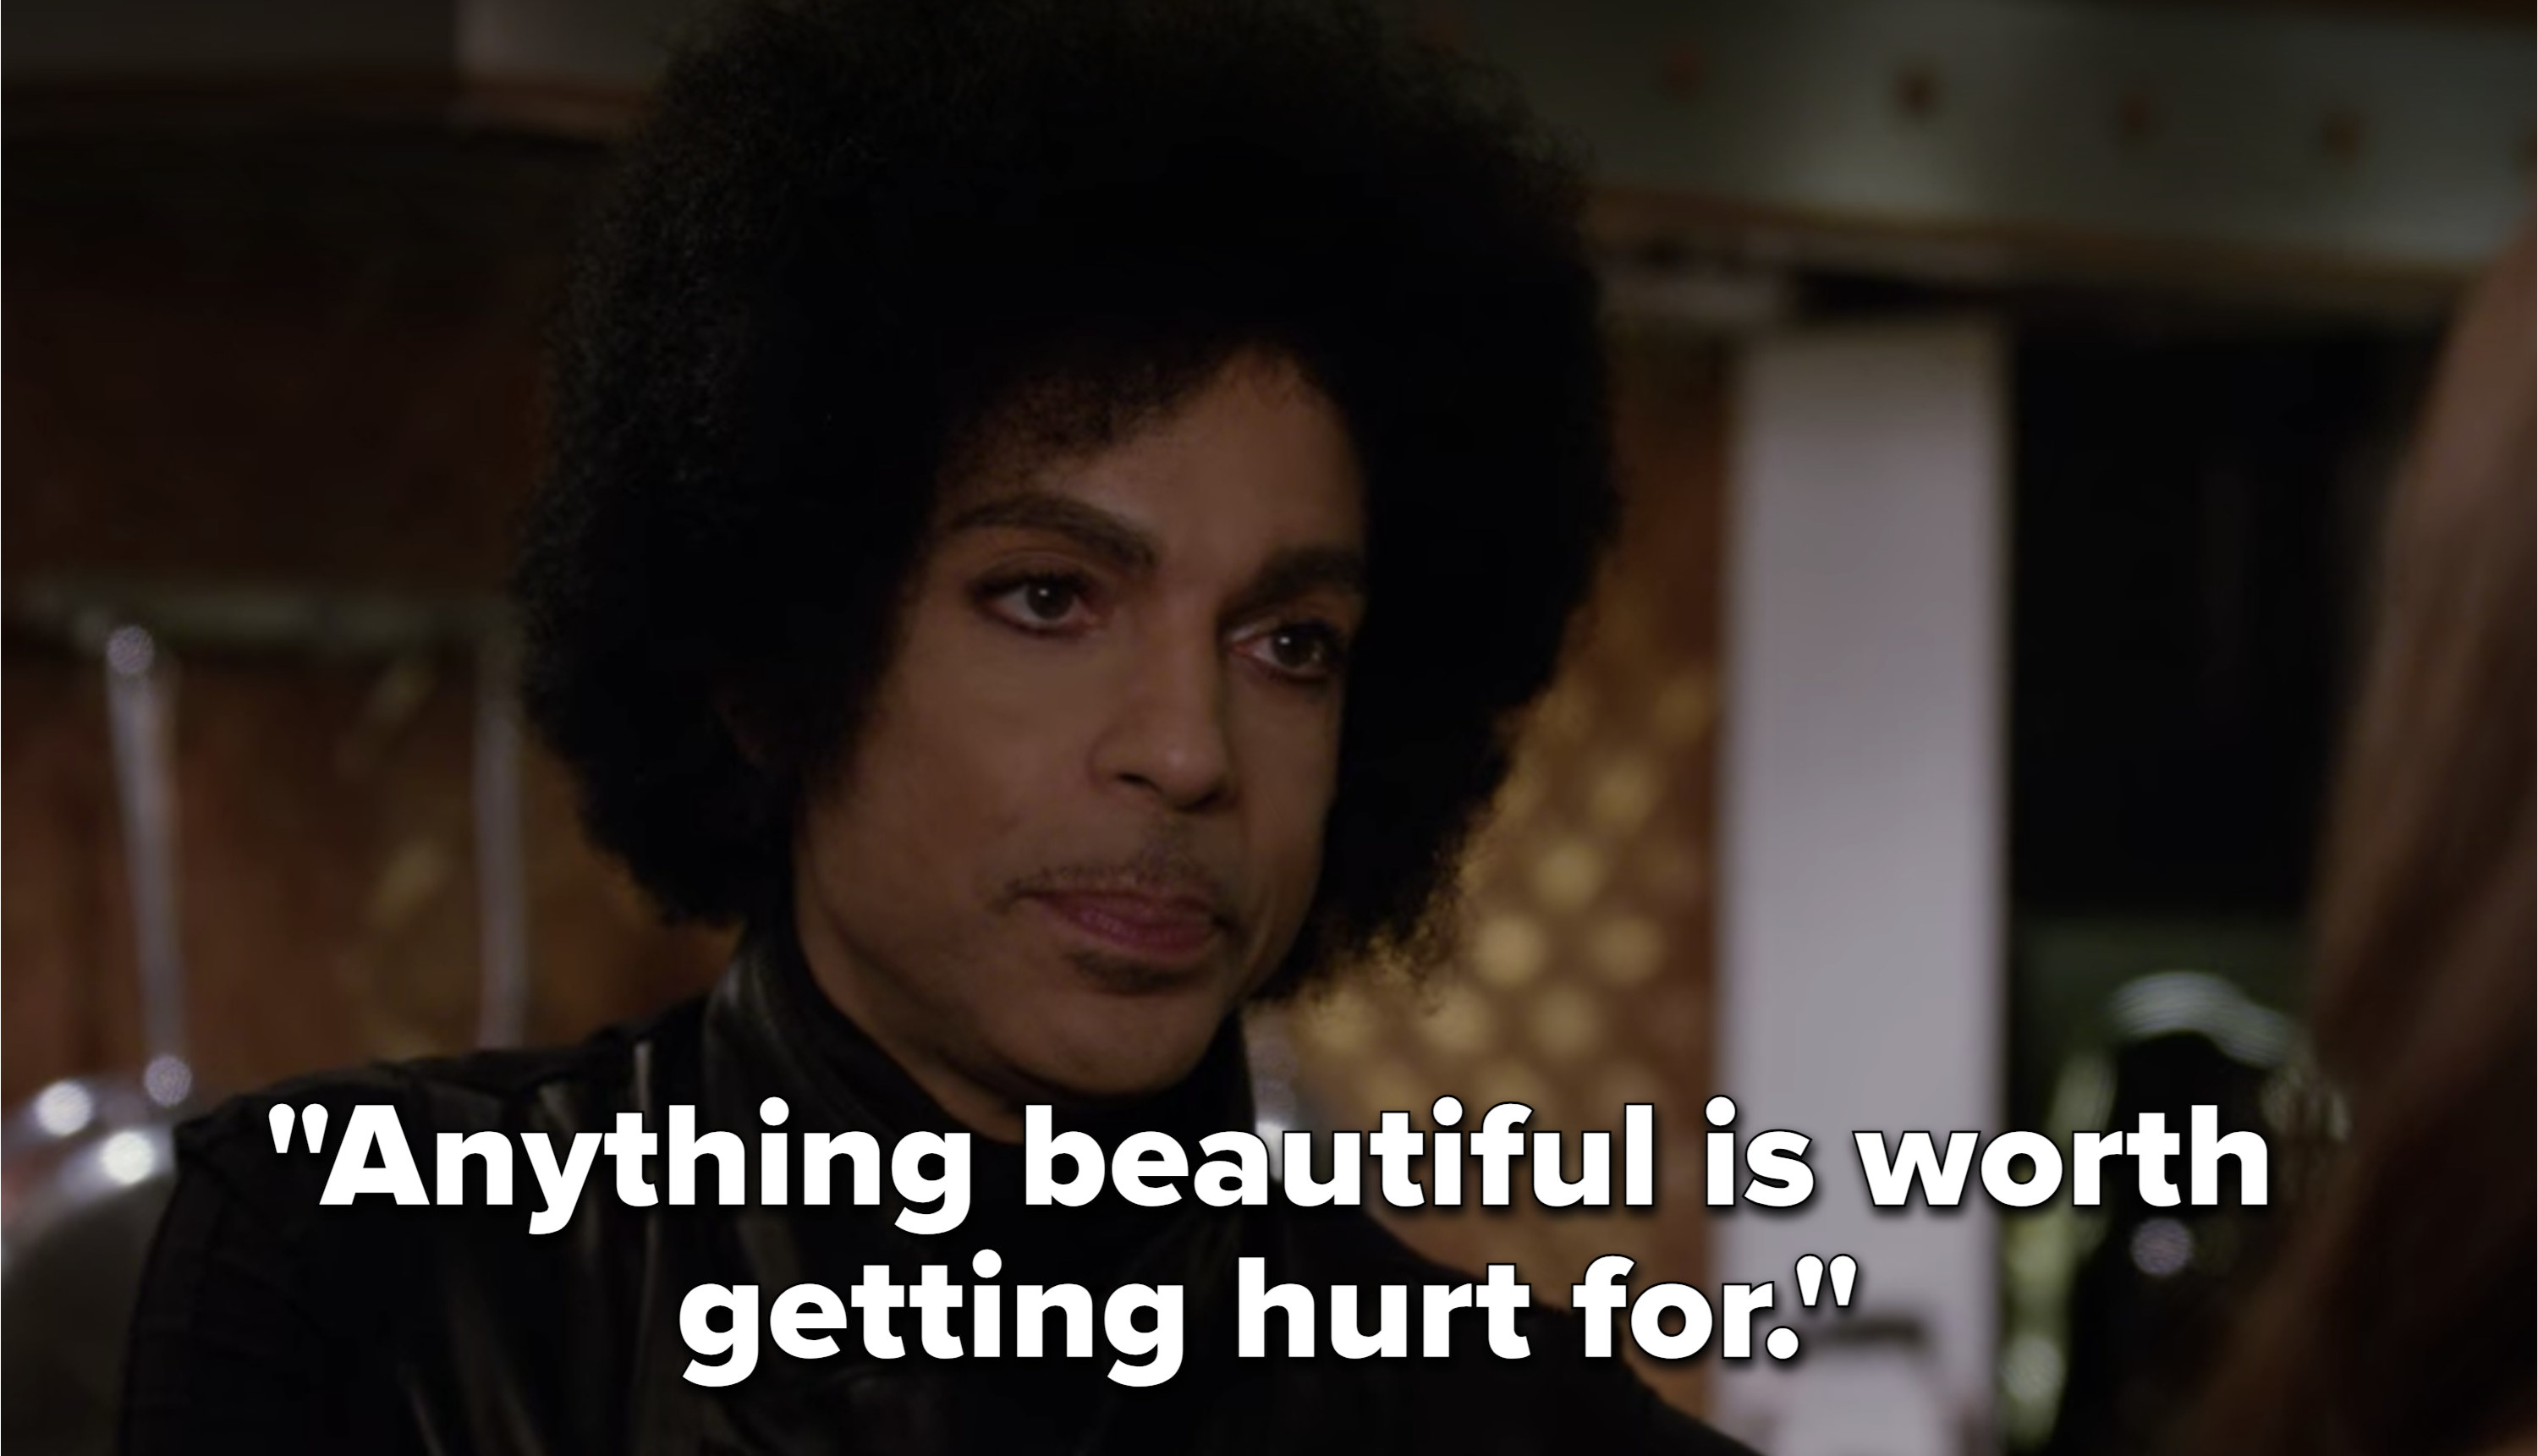 Prince saying, &quot;Anything beautiful is worth getting hurt for&quot; in the epsiode